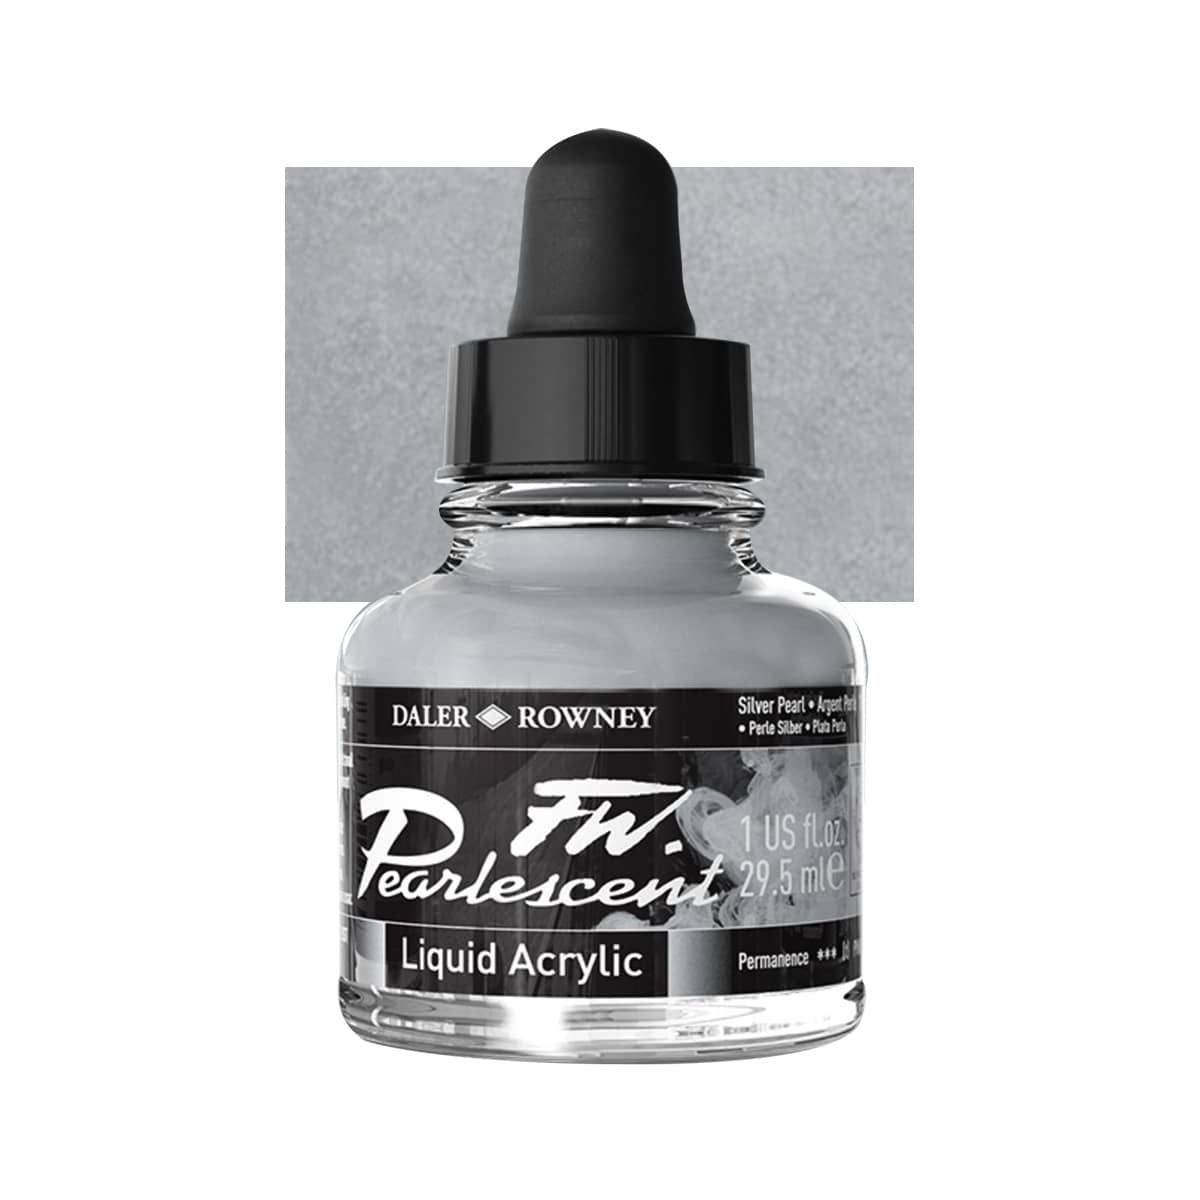 Daler-Rowney F.W. Pearlescent Acrylic Ink 1 oz Bottle - Silver Pearl